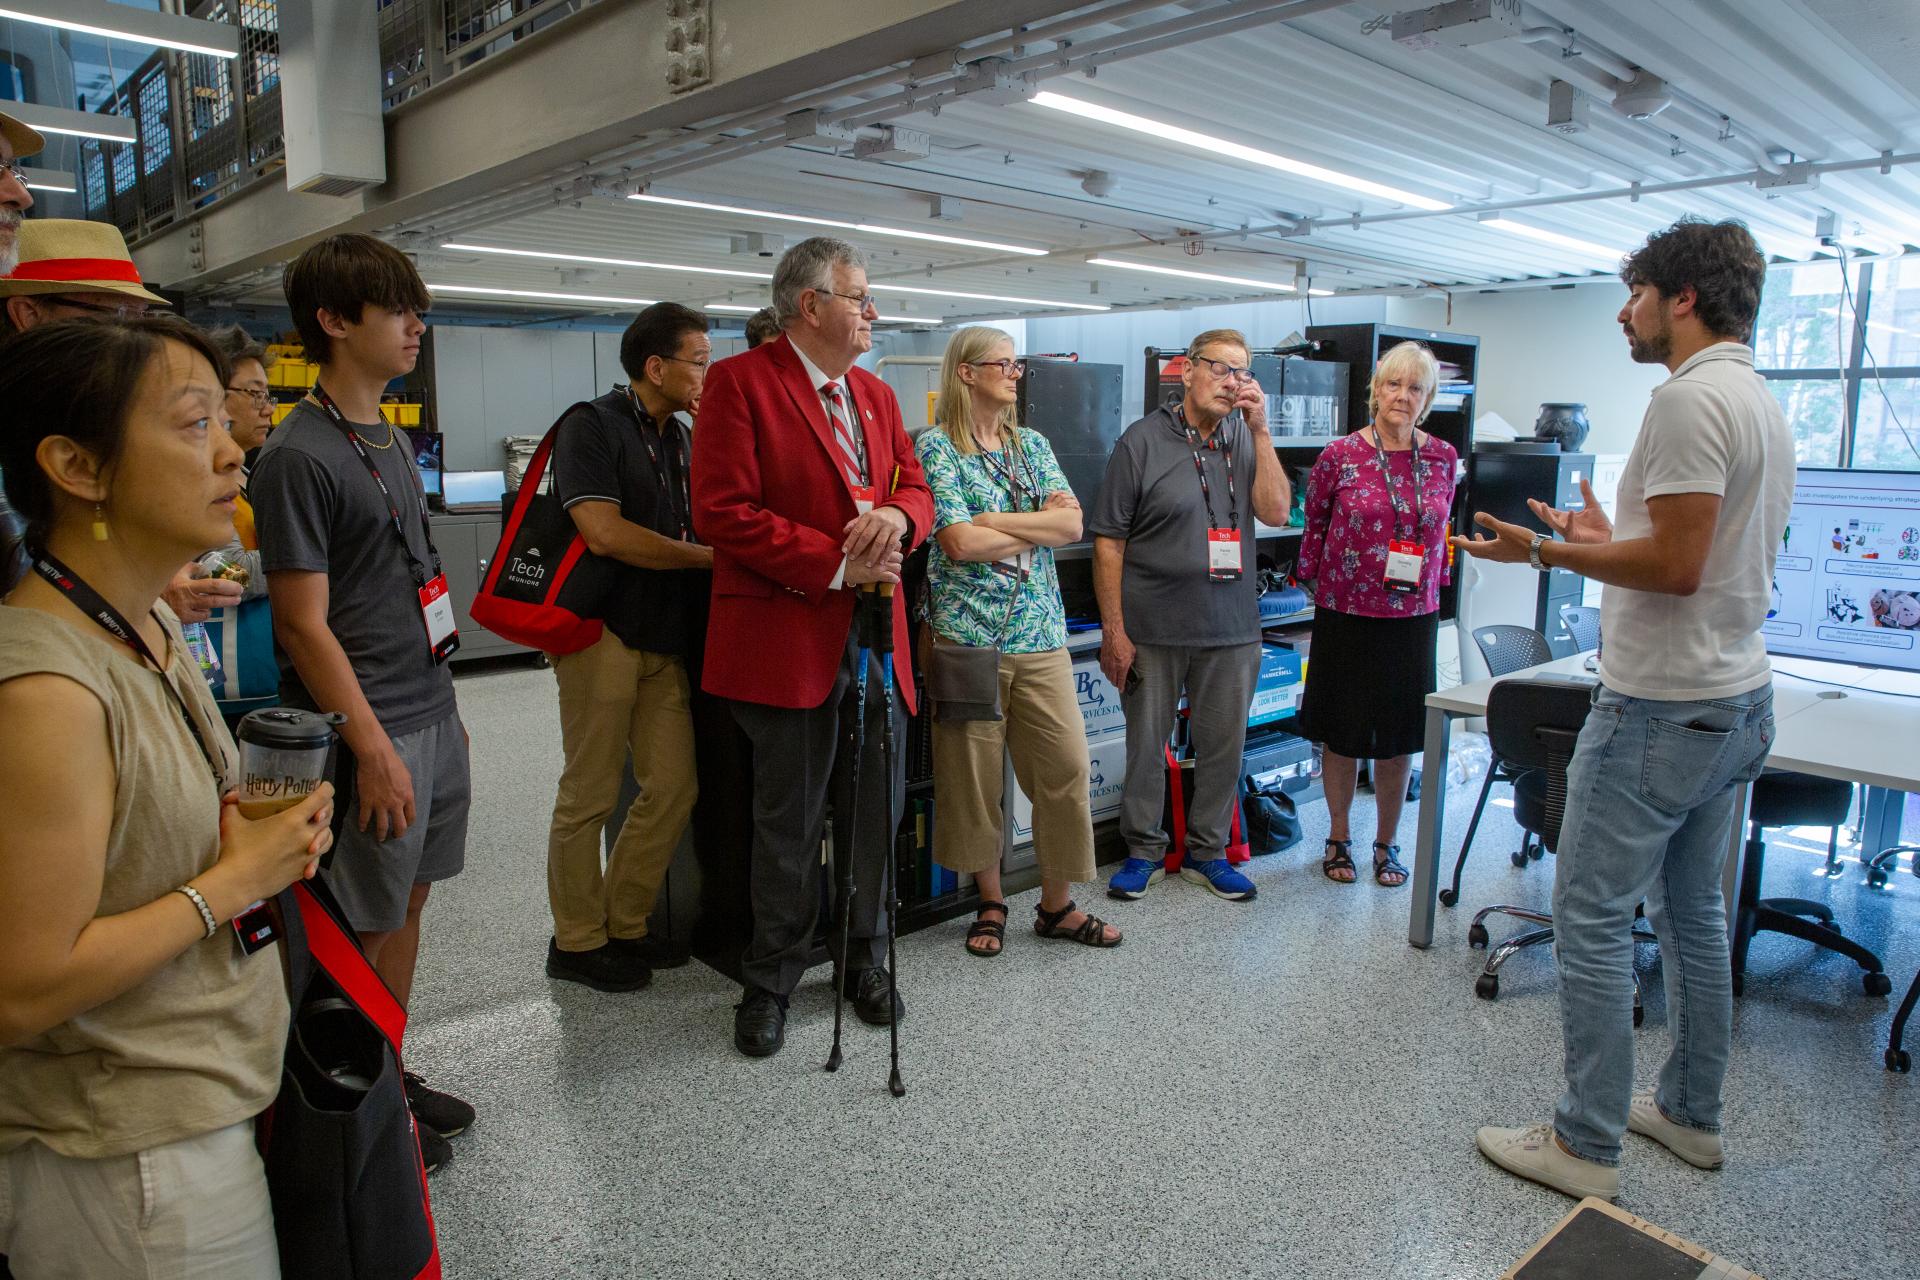 The Eric P and Evelyn E Newman Laboratory provides a new home for robotics and biomechanics research in MechE. The Newman Lab will drive innovation and collaboration to improve human performance through technology.